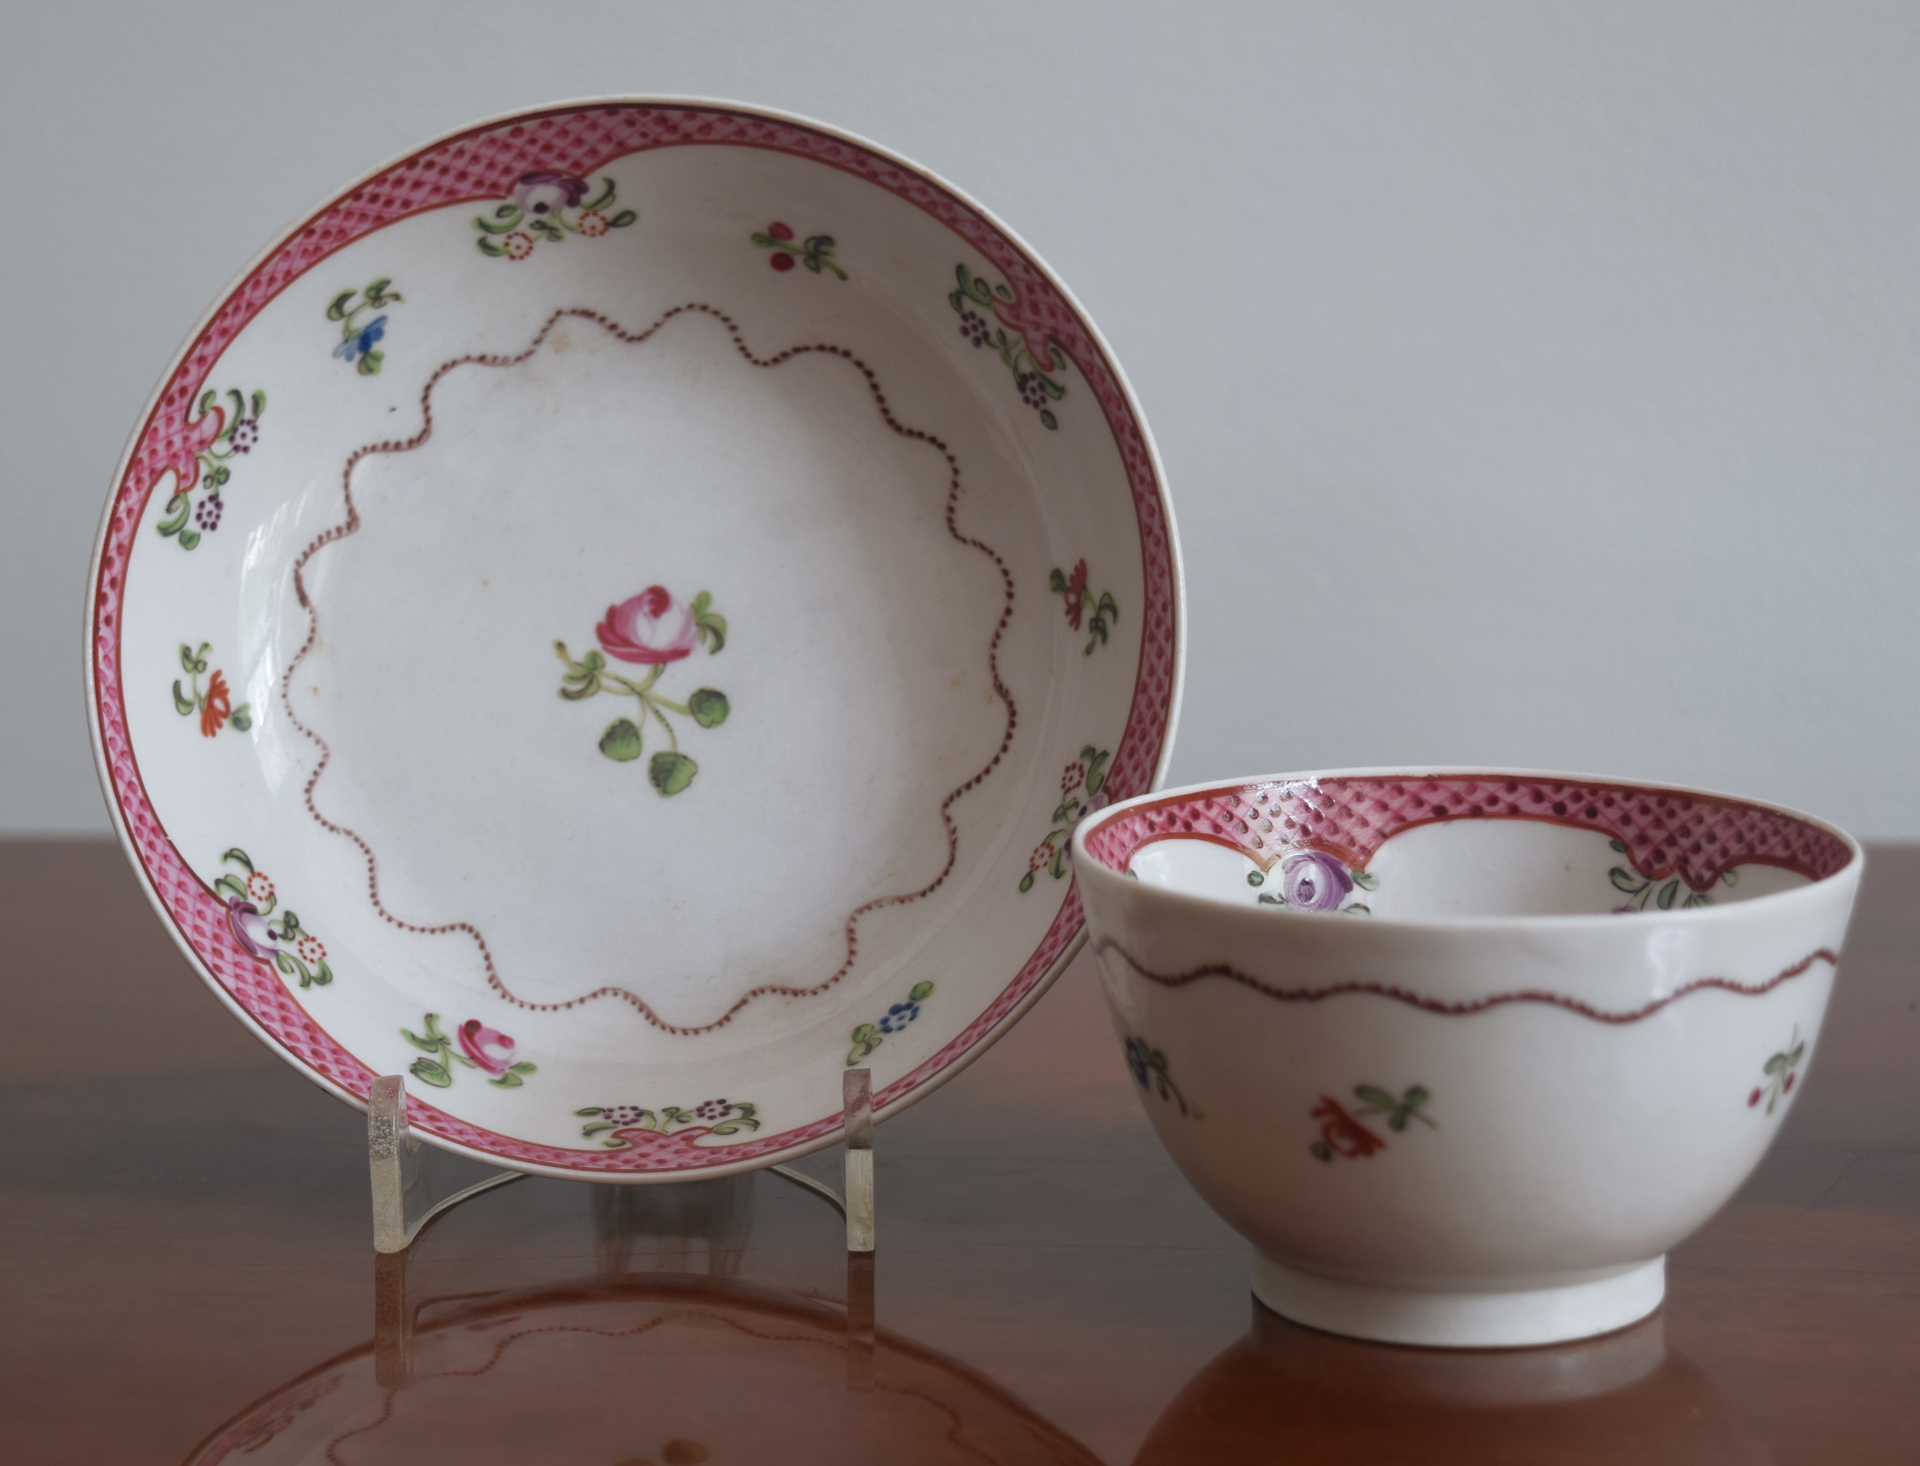 A FAMILLE-ROSE TEACUP AND SAUCER WITH LATTICE RIMS